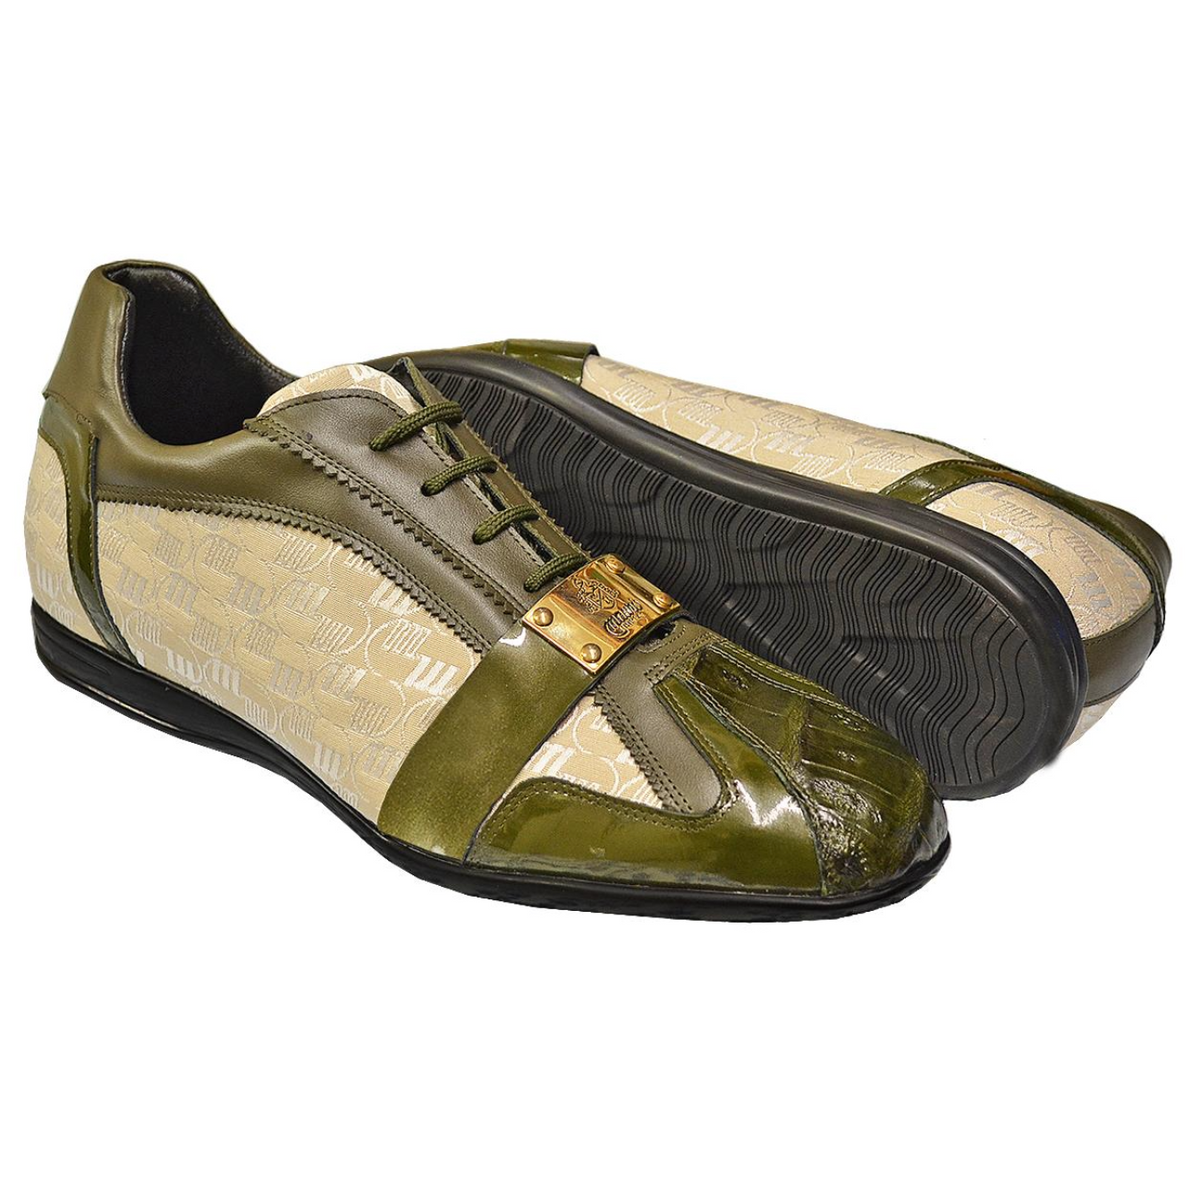 Mauri 8665 Olive Green Genuine Crocodile Patent Leather Fabric Sneakers - Dudes Boutique